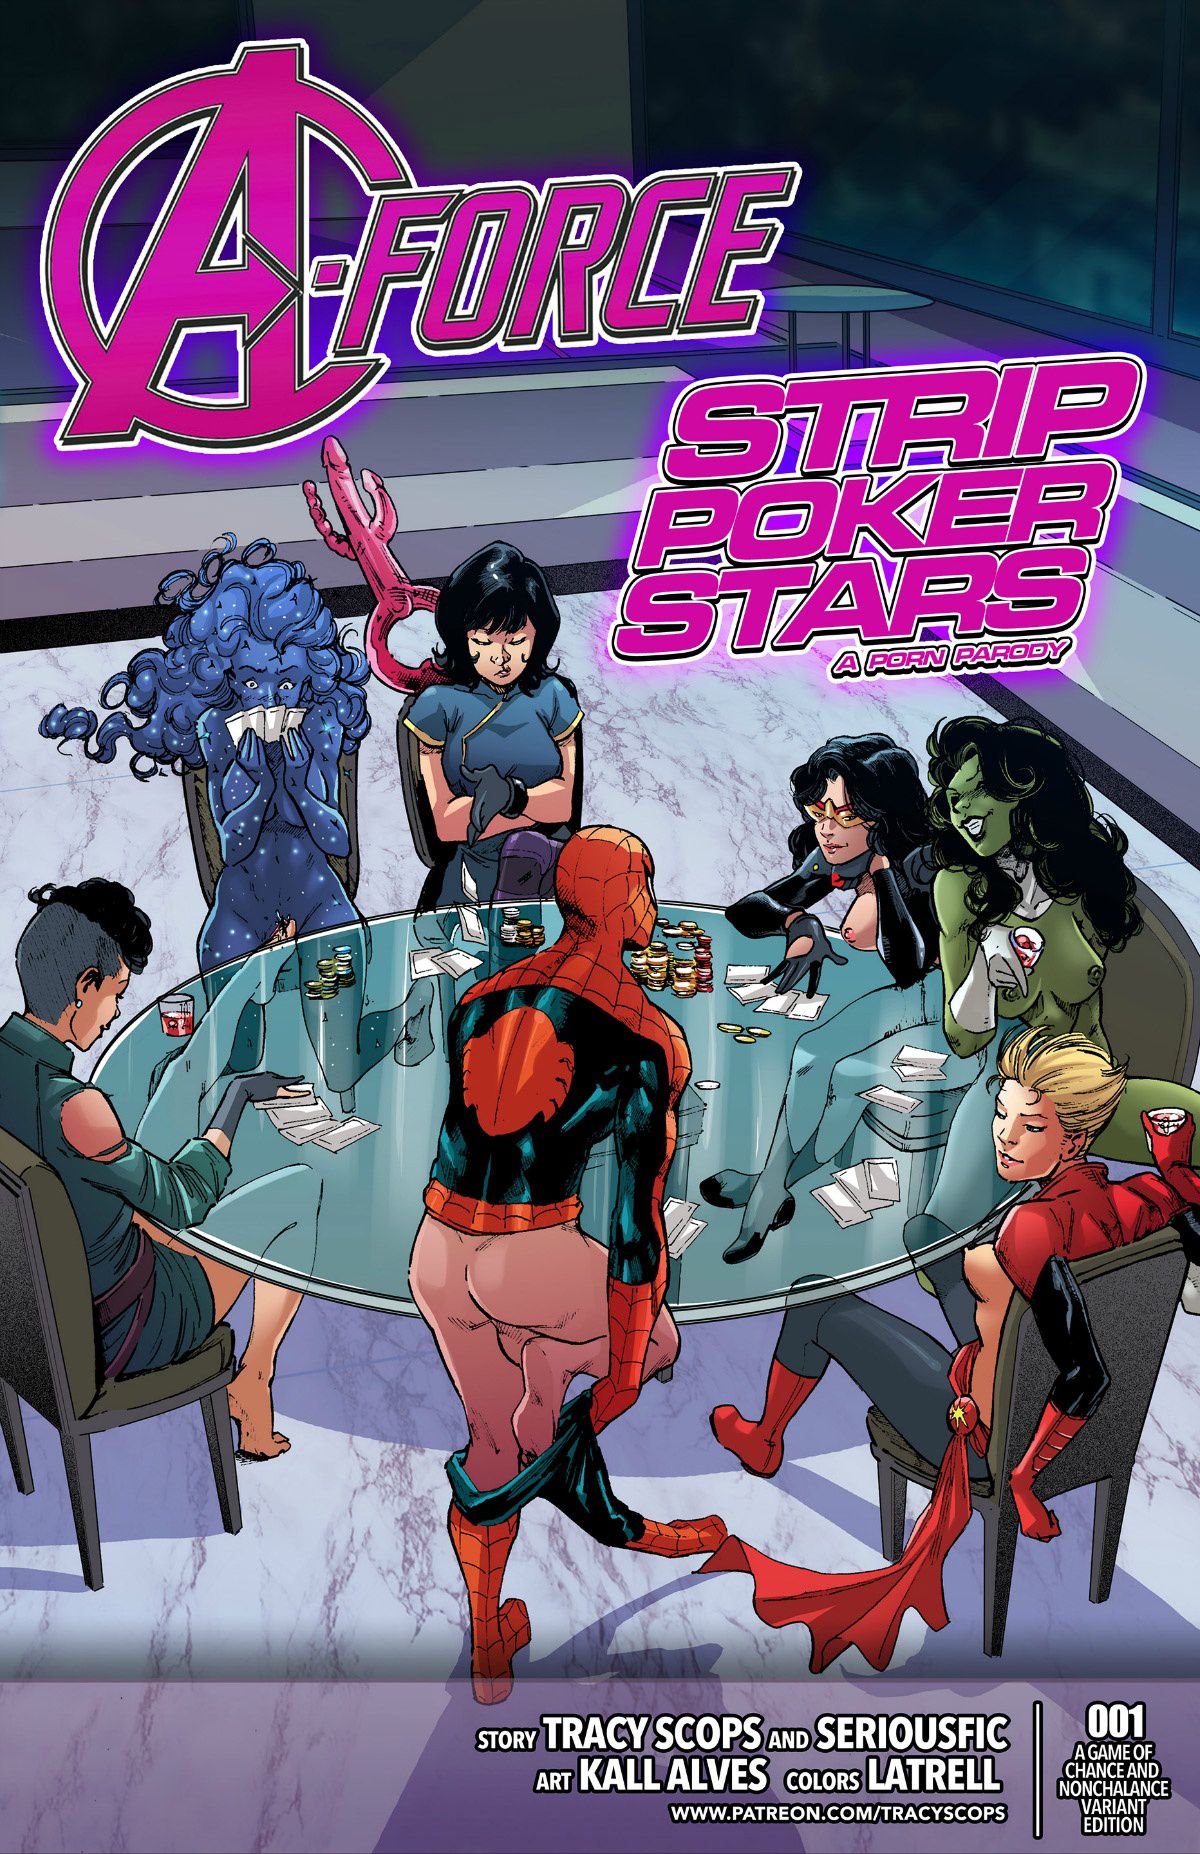 A-Force Strip Poker Stars (Spider-Man , The Avengers) [Tracy Scops] Porn Comic